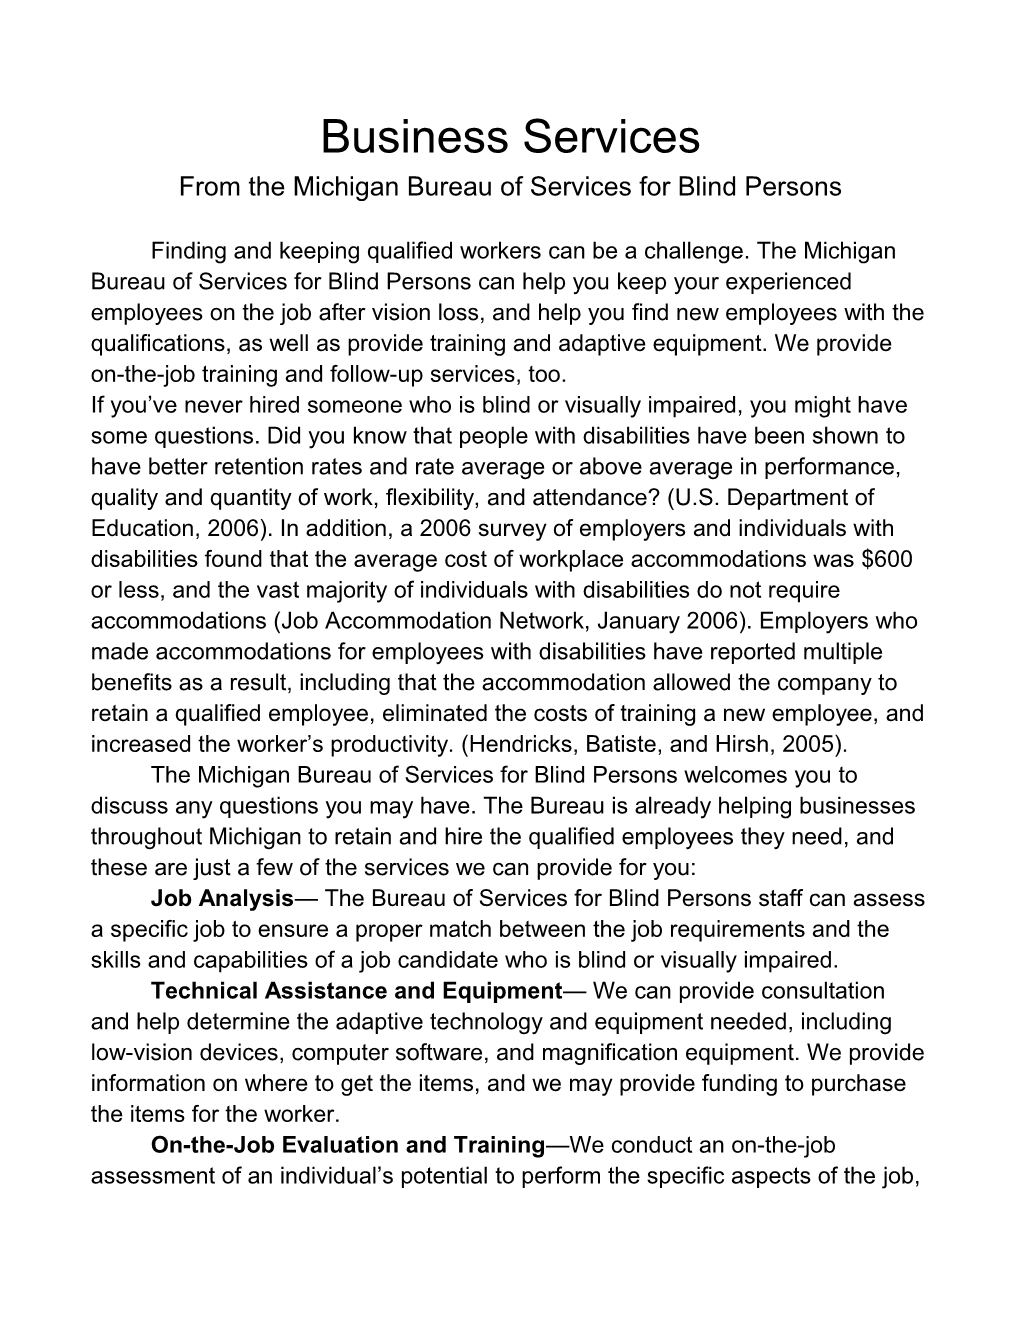 From the Michigan Bureau of Services for Blind Persons